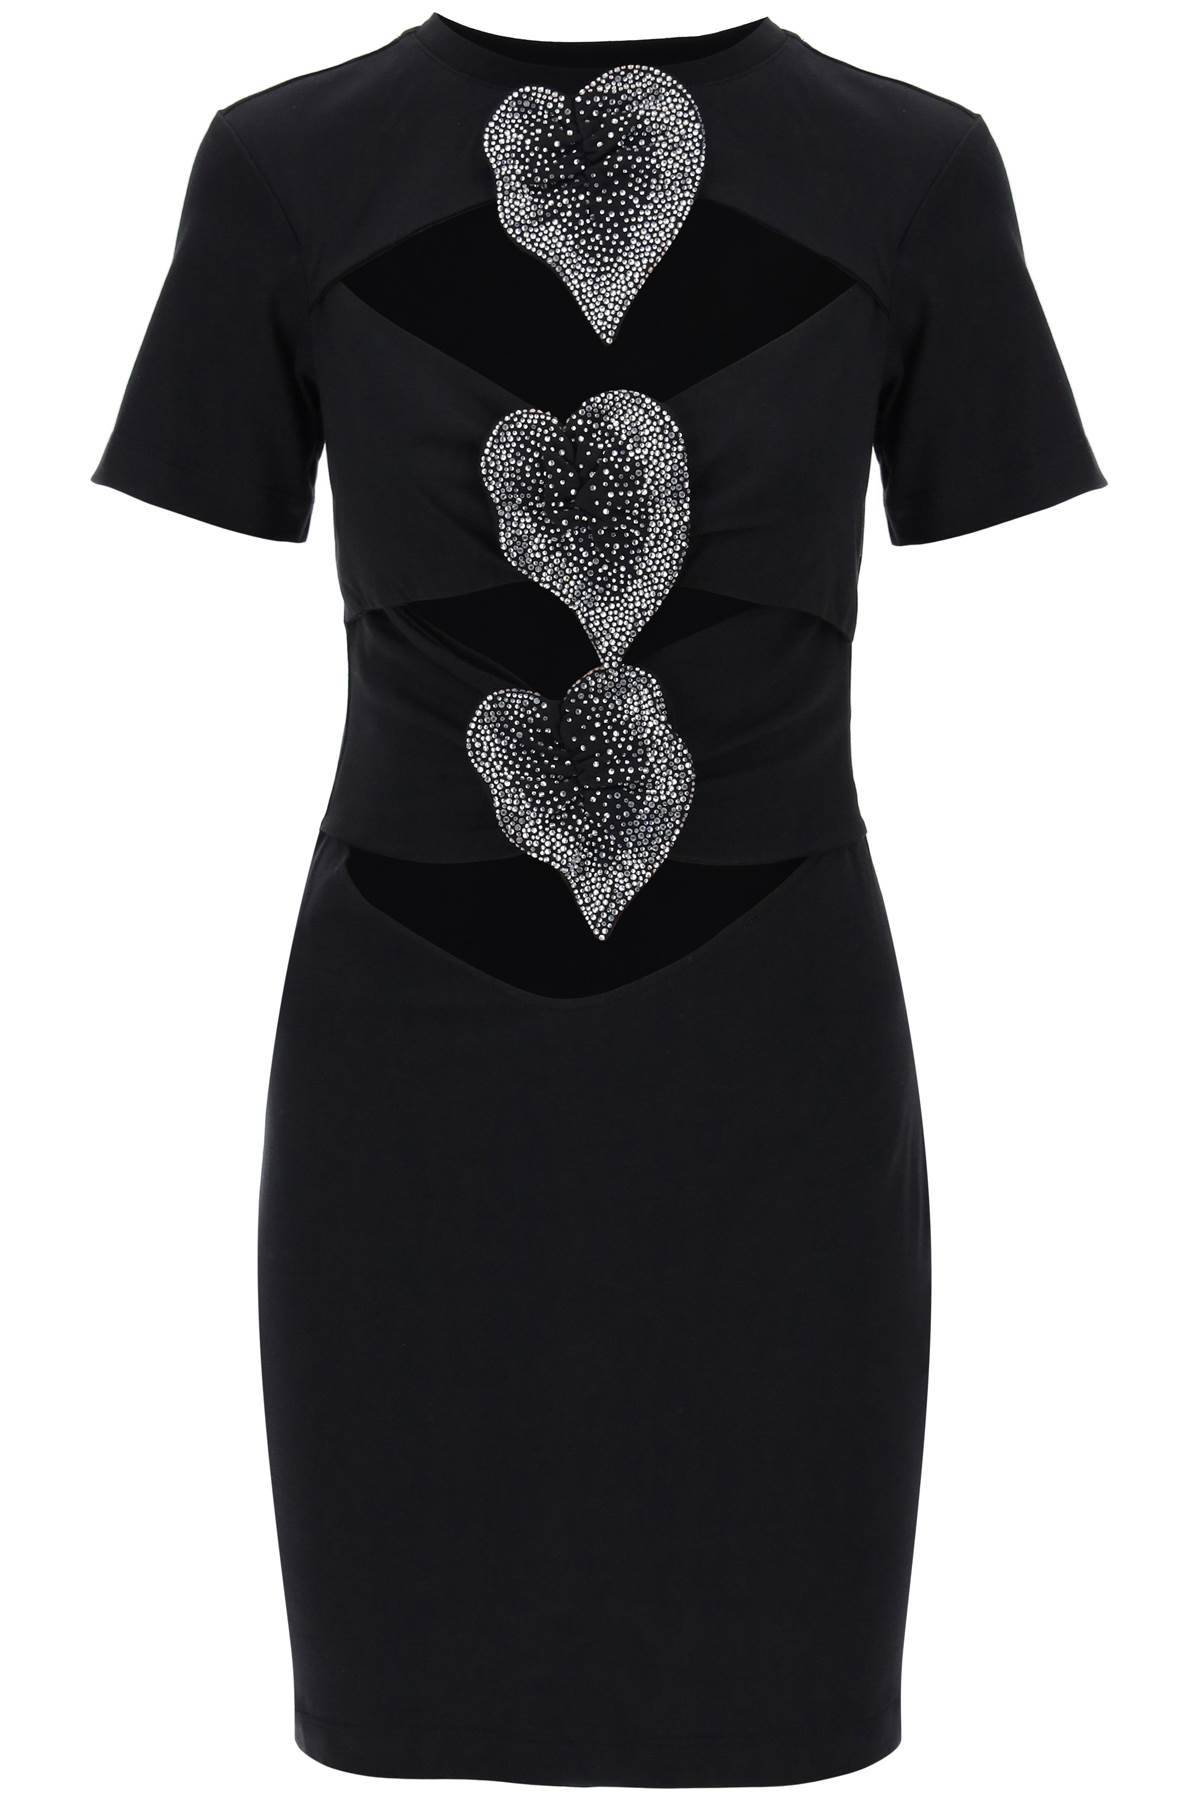 GIUSEPPE DI MORABITO GIUSEPPE DI MORABITO mini cut-out dress with applied anthur